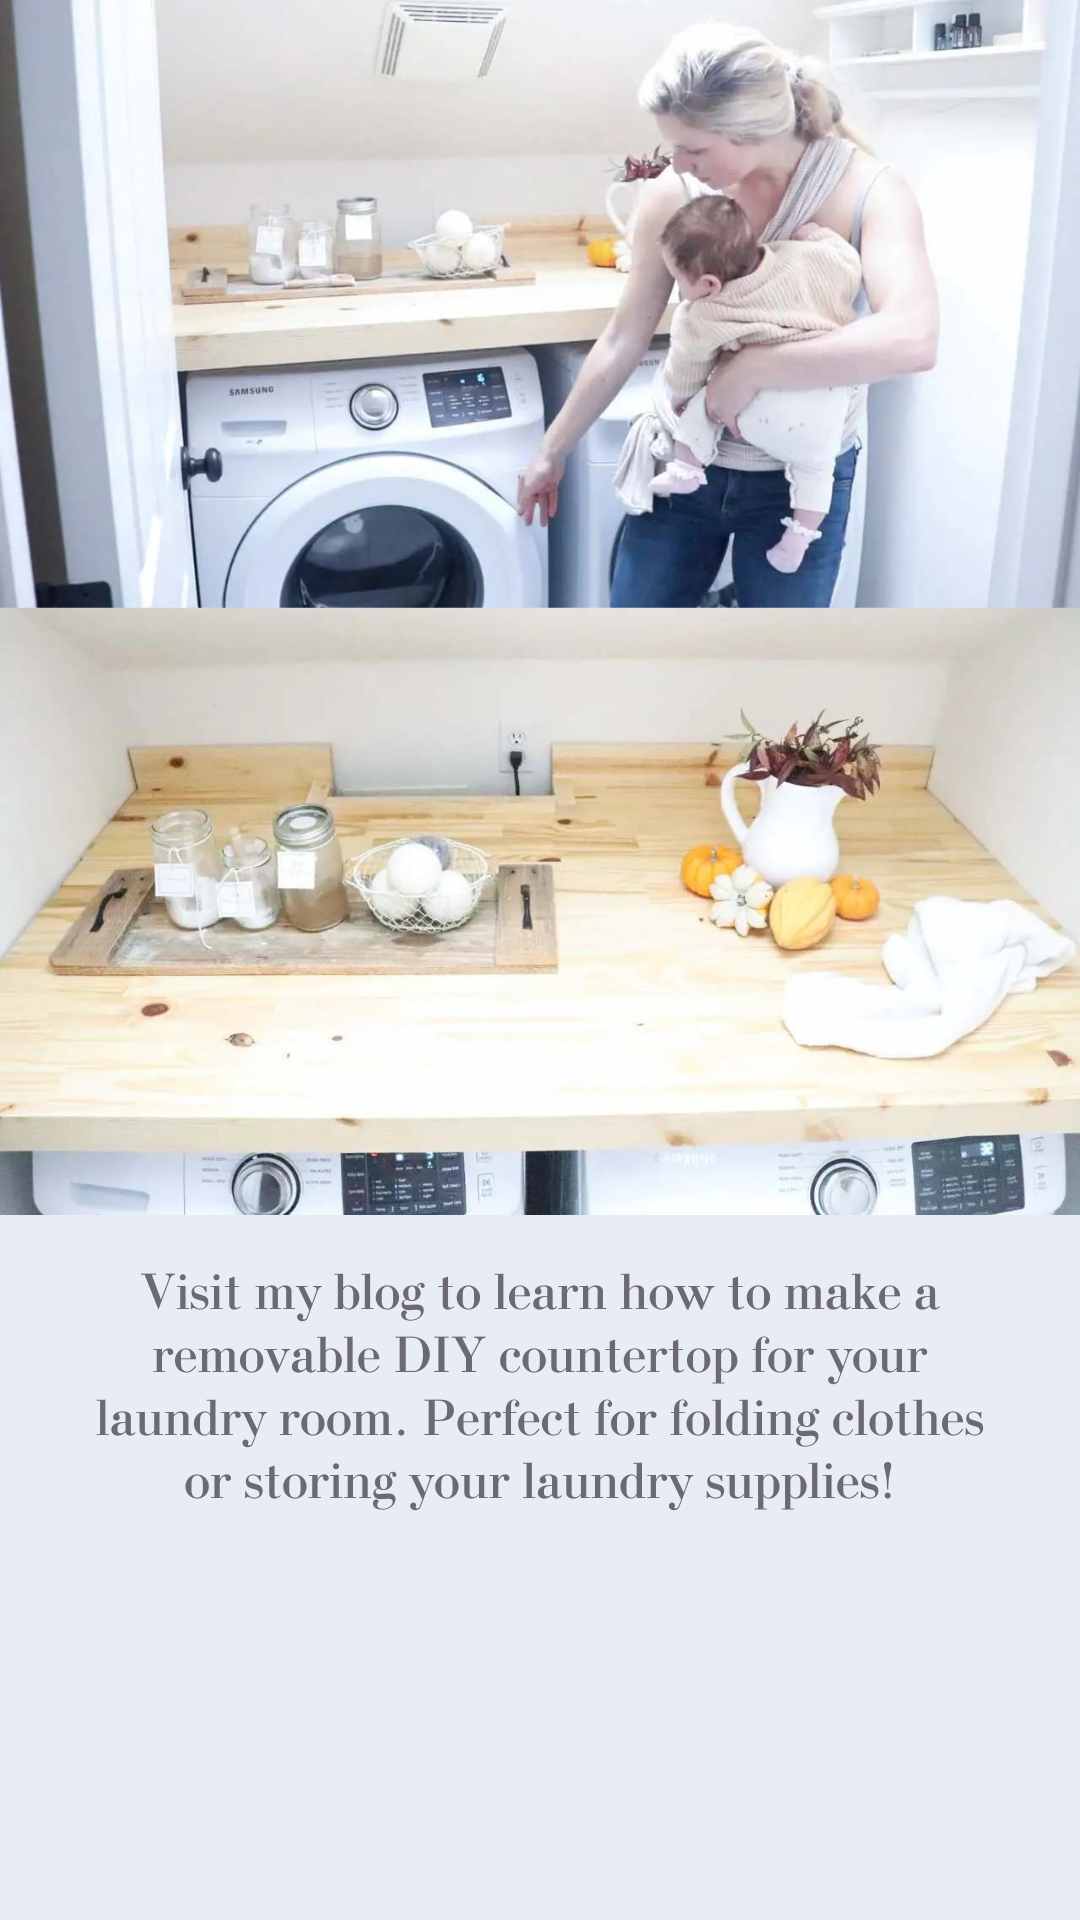 https://theduvallhomestead.com/wp-content/uploads/2023/04/S2-how-to-build-a-laundry-countertop-over-washer-and-dryer-DIY-laundry-shelf-counter-top-modular-removable-easy-to-install-farmhouse.jpg